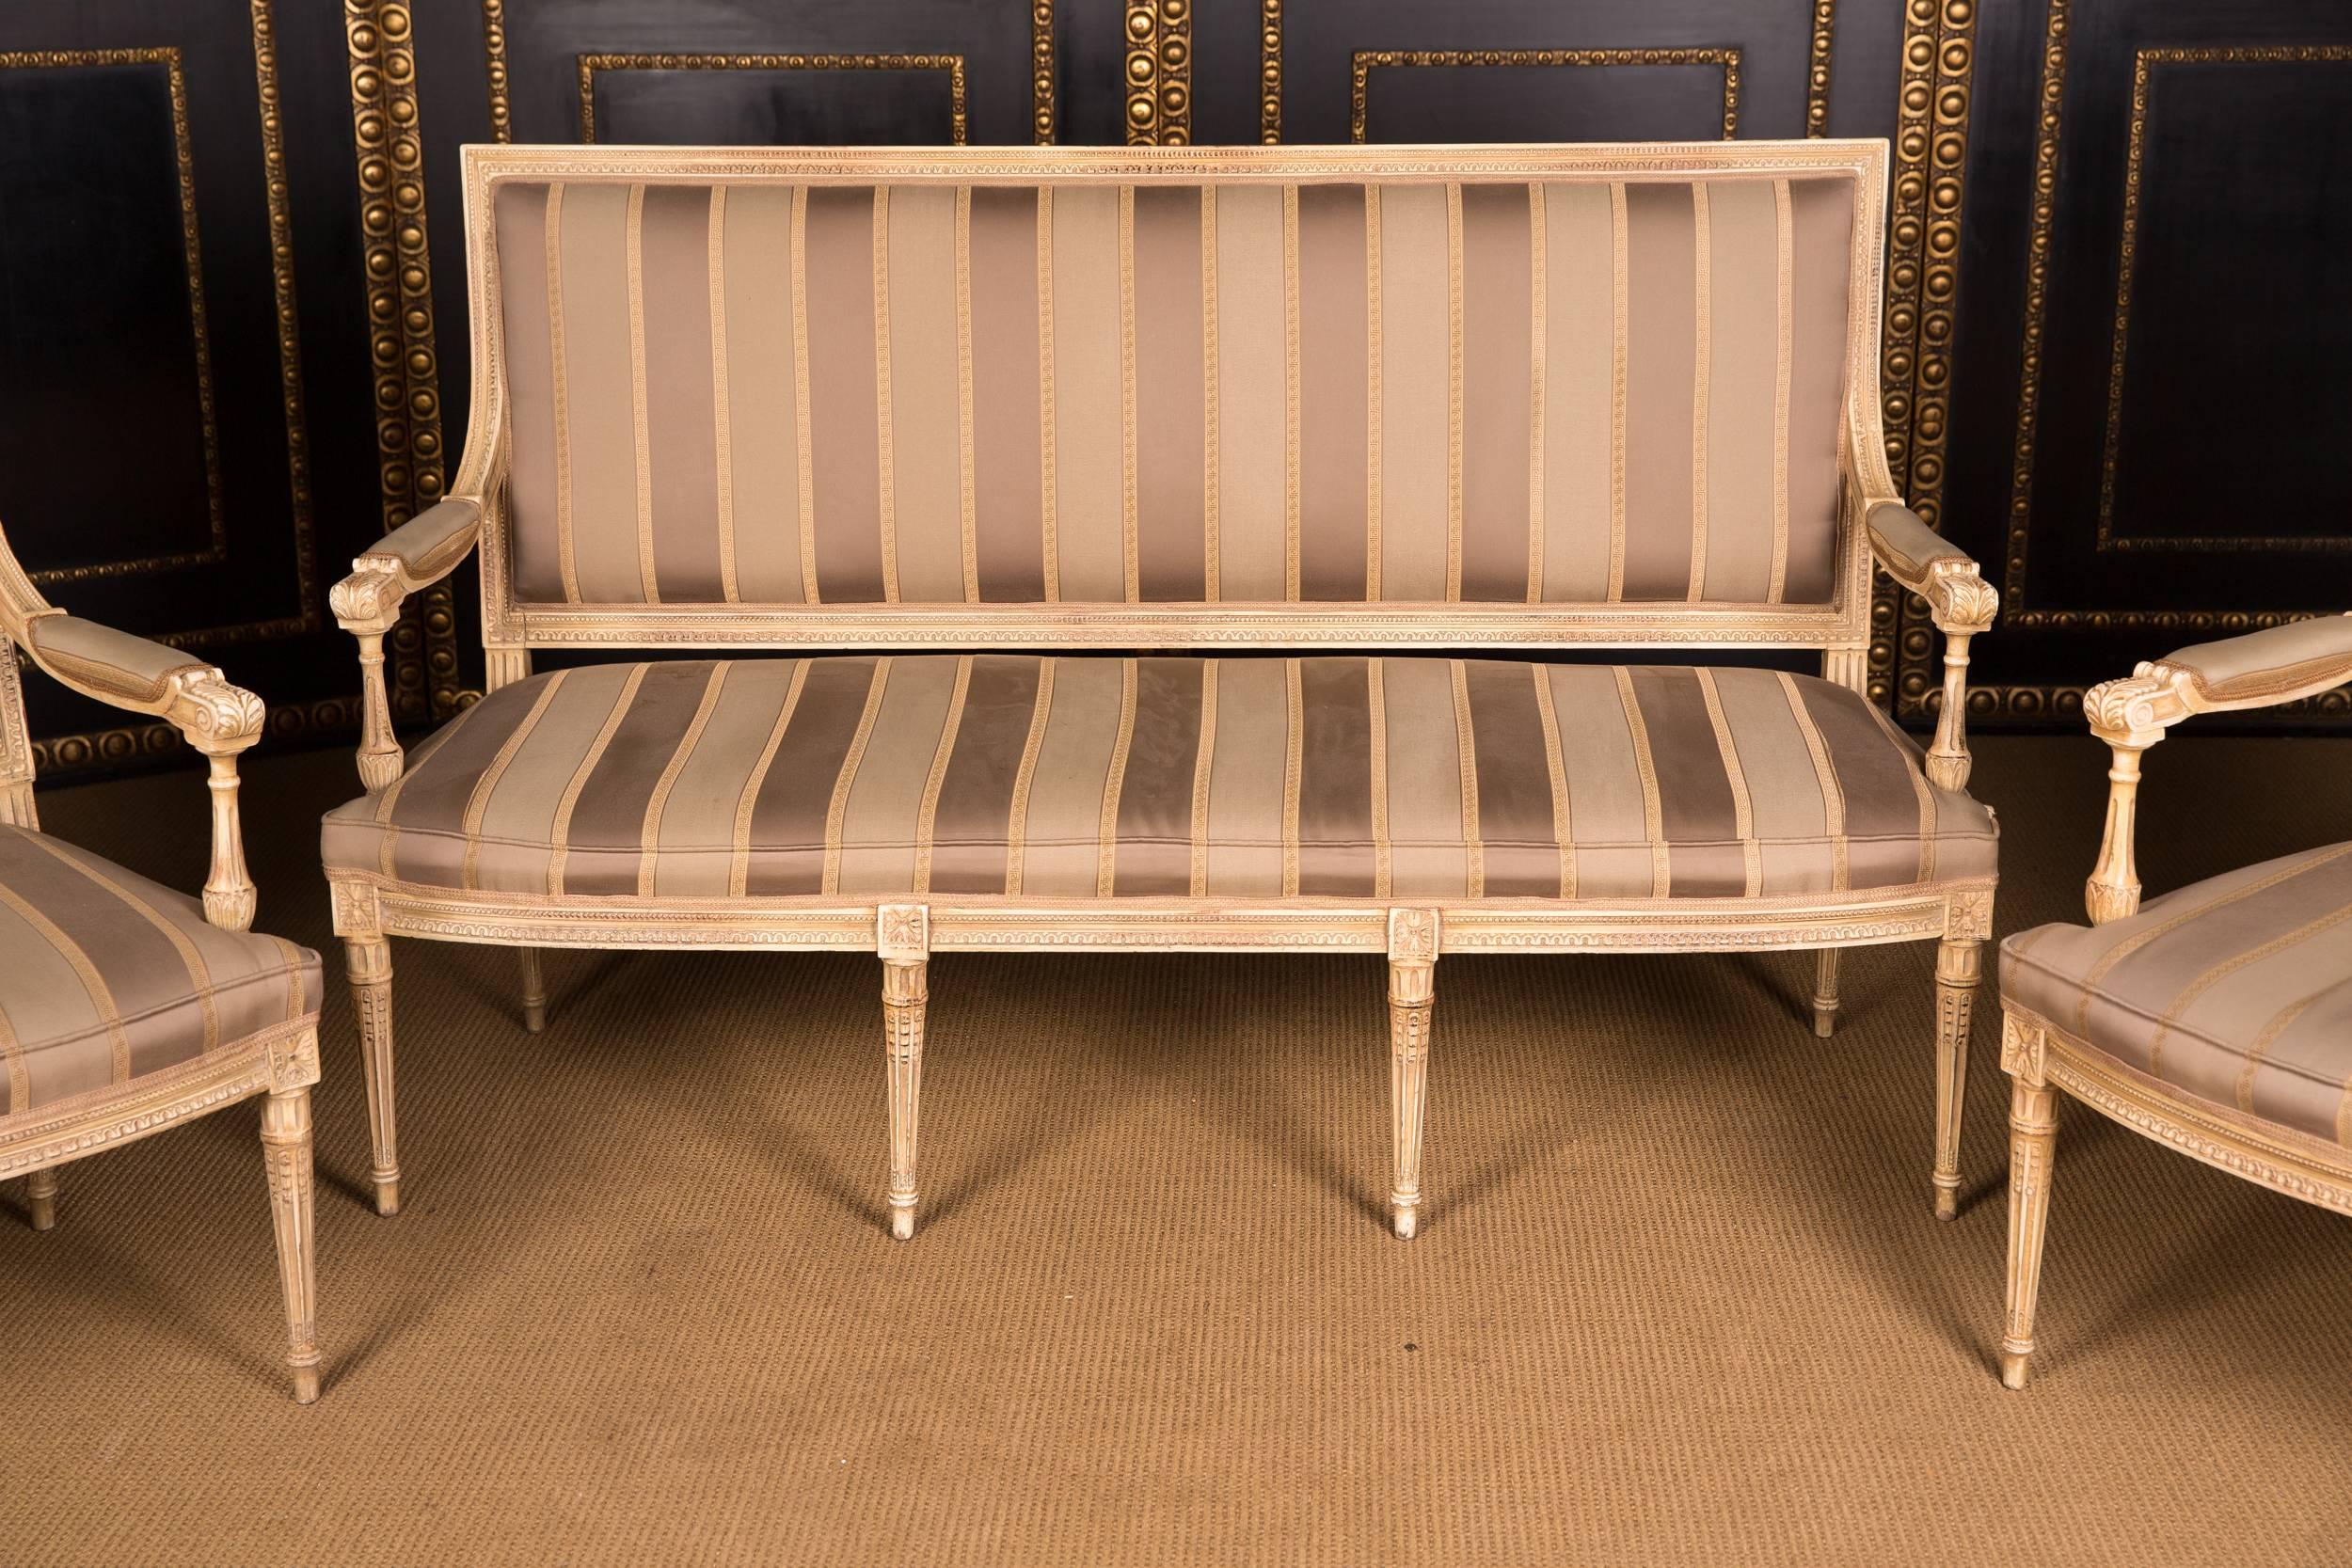 Louis XVI High Quality Seating Furniture Suite and Two Armchairs in the Louis Seize Style